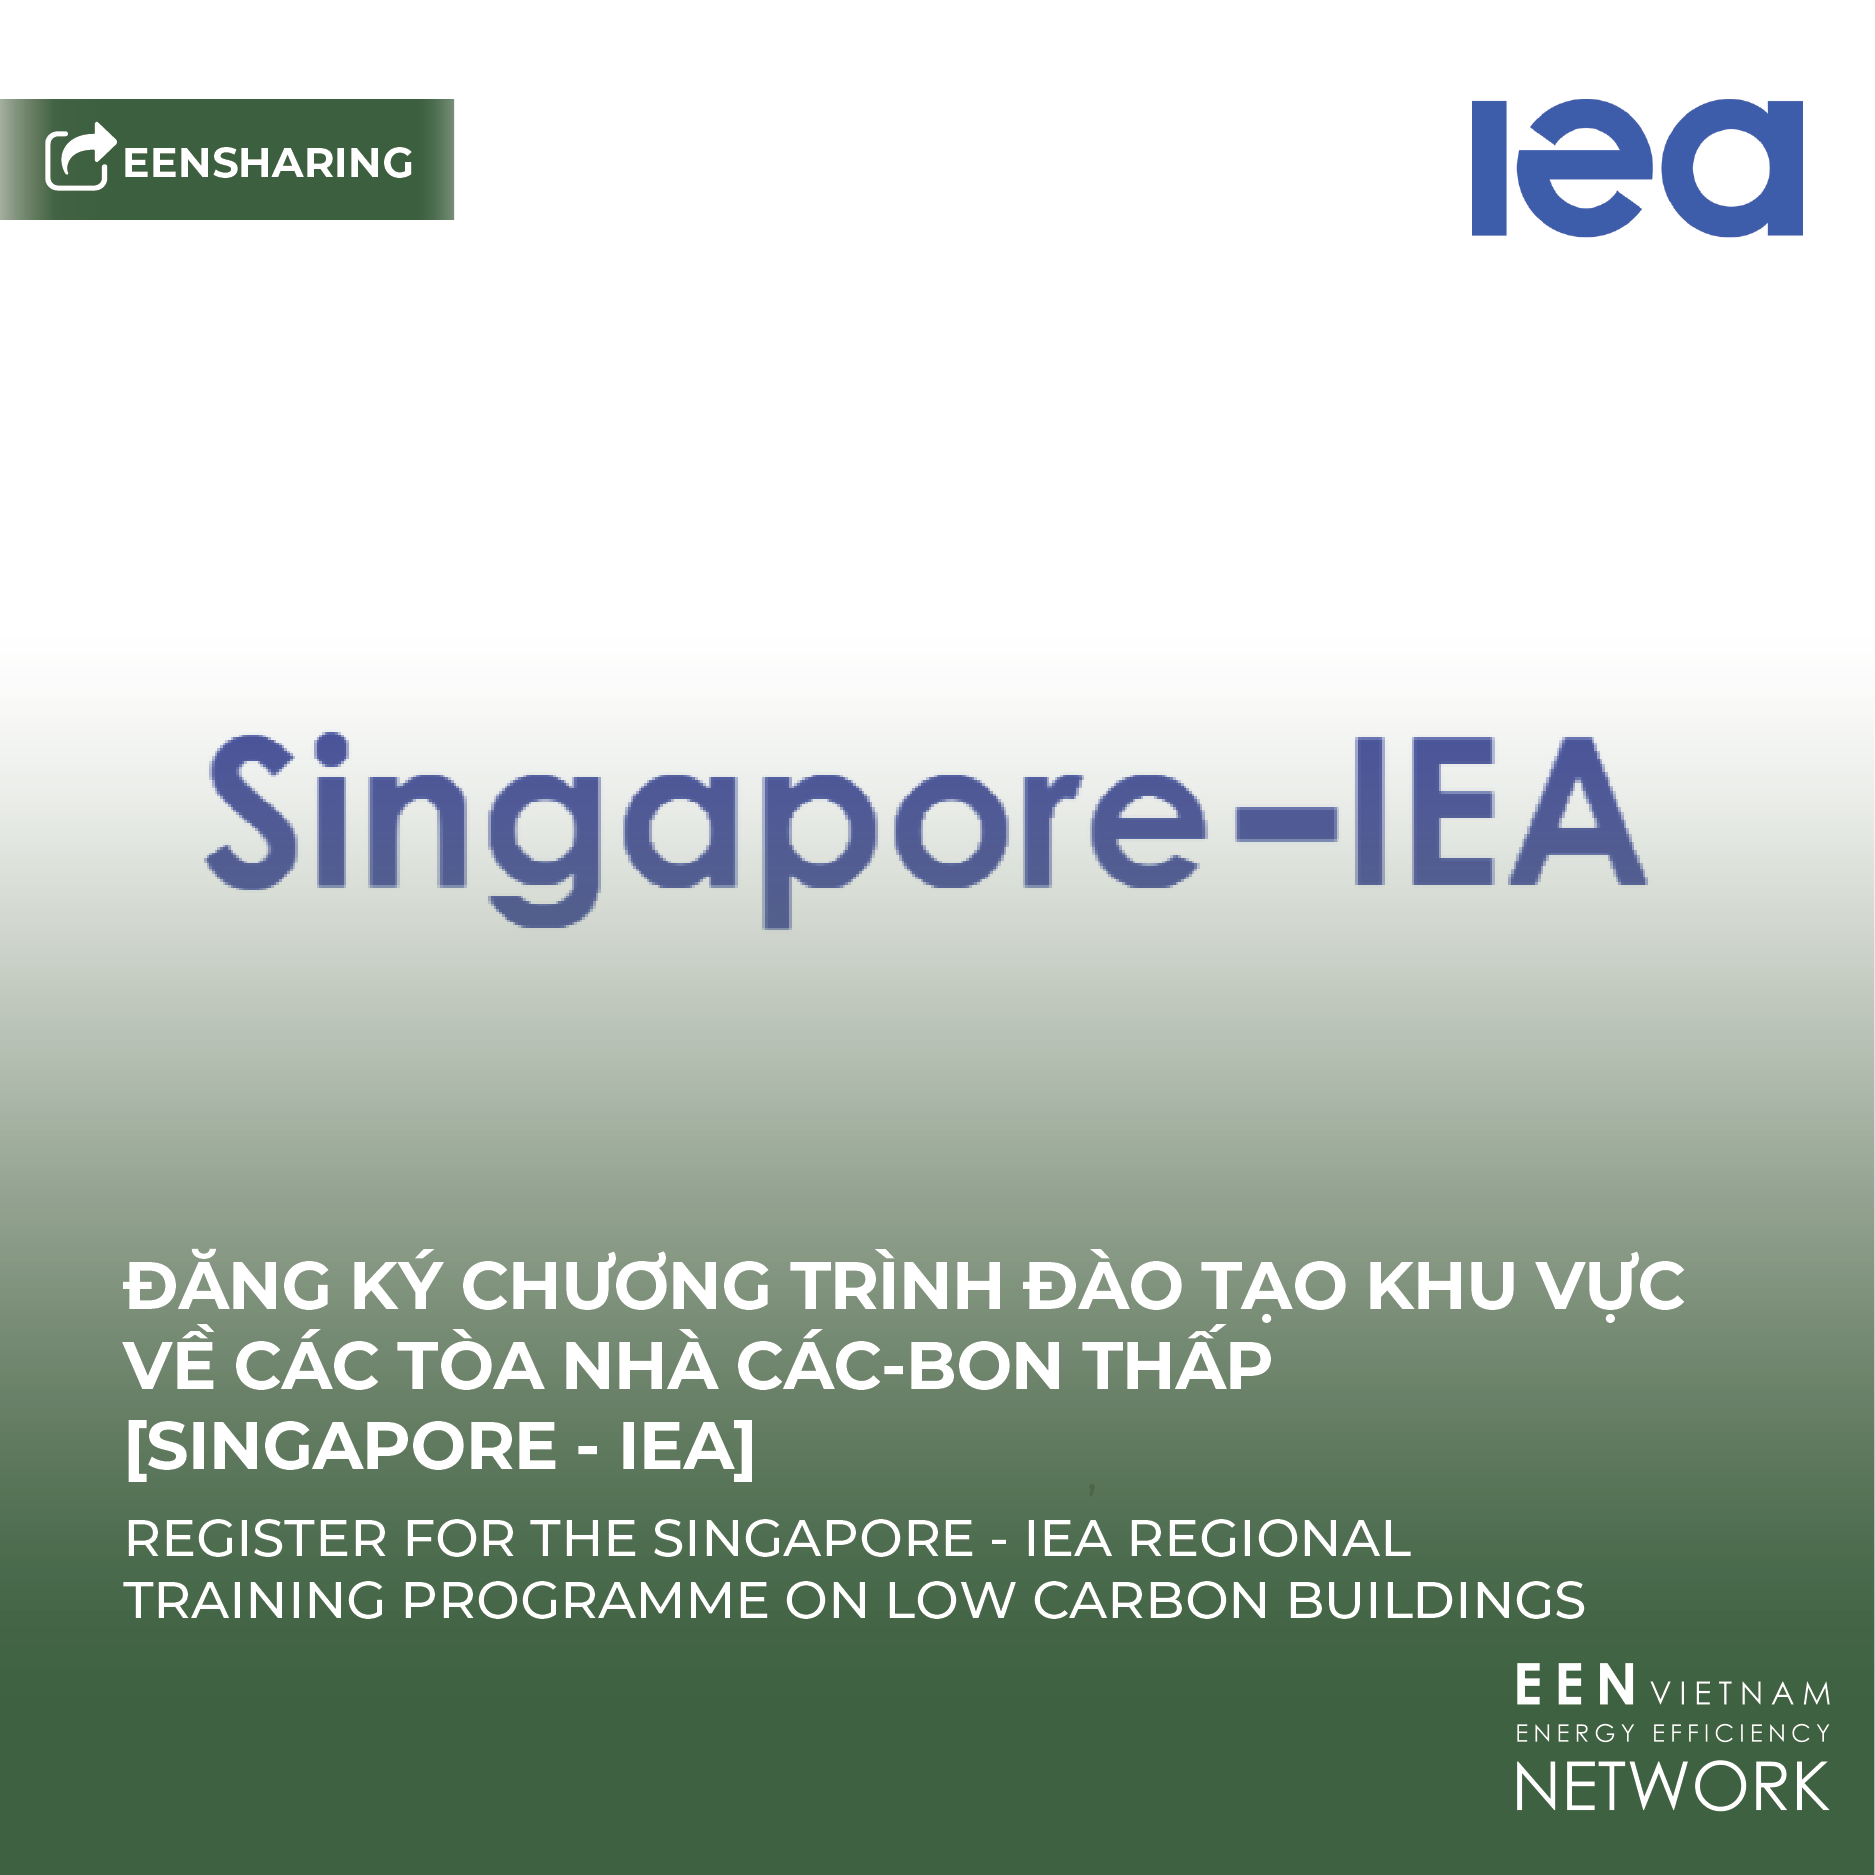 REGISTER FOR THE SINGAPORE - IEA REGIONAL TRAINING PROGRAMME ON LOW CARBON BUILDINGS